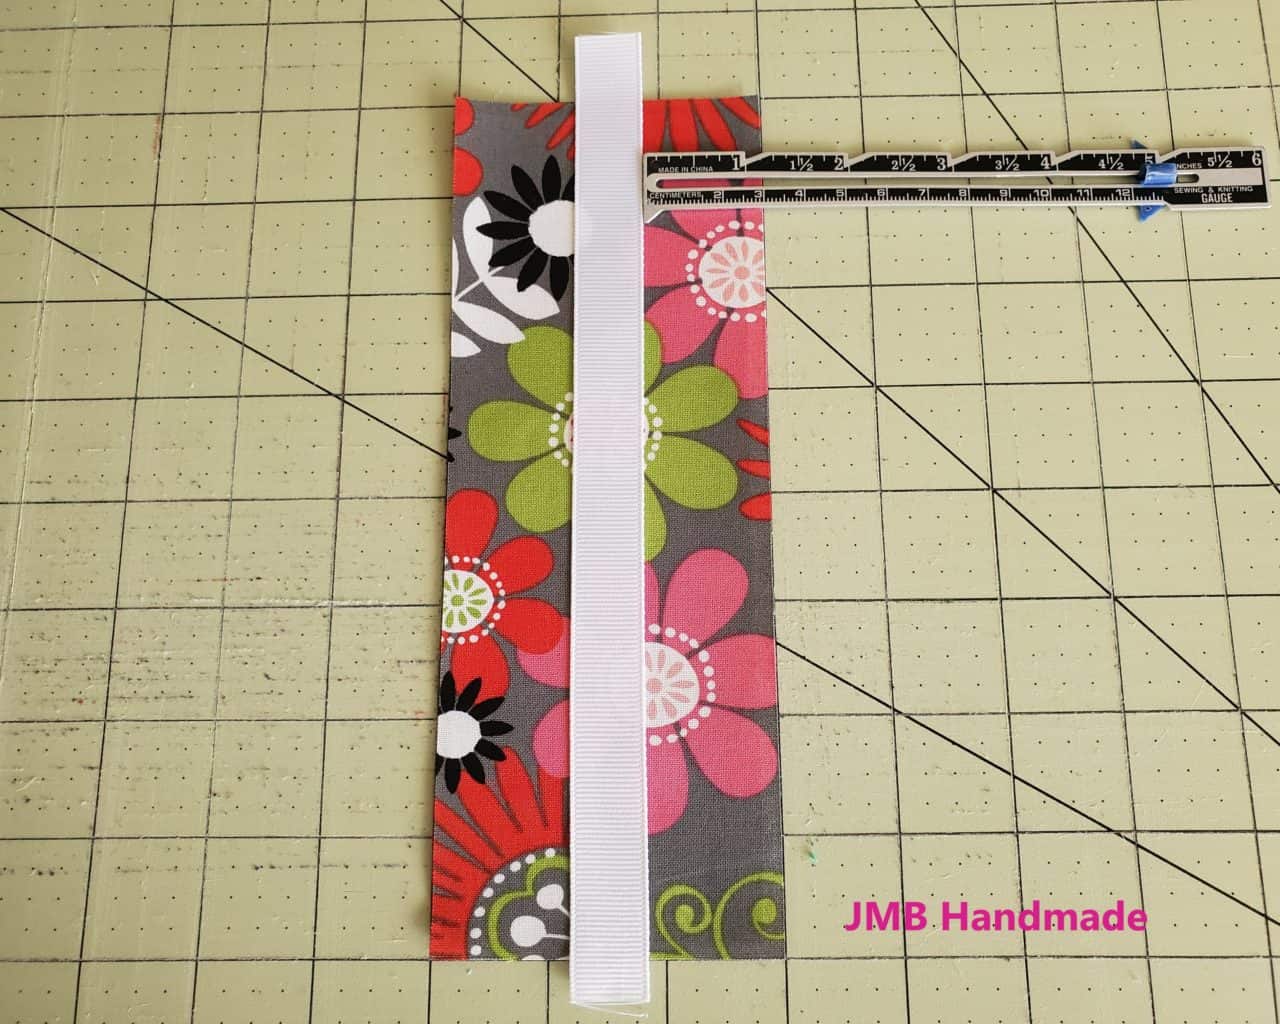 🌸 EASY 🌸 DIY Fabric Pen or Pencil Bookmark PDF Sewing Patterns